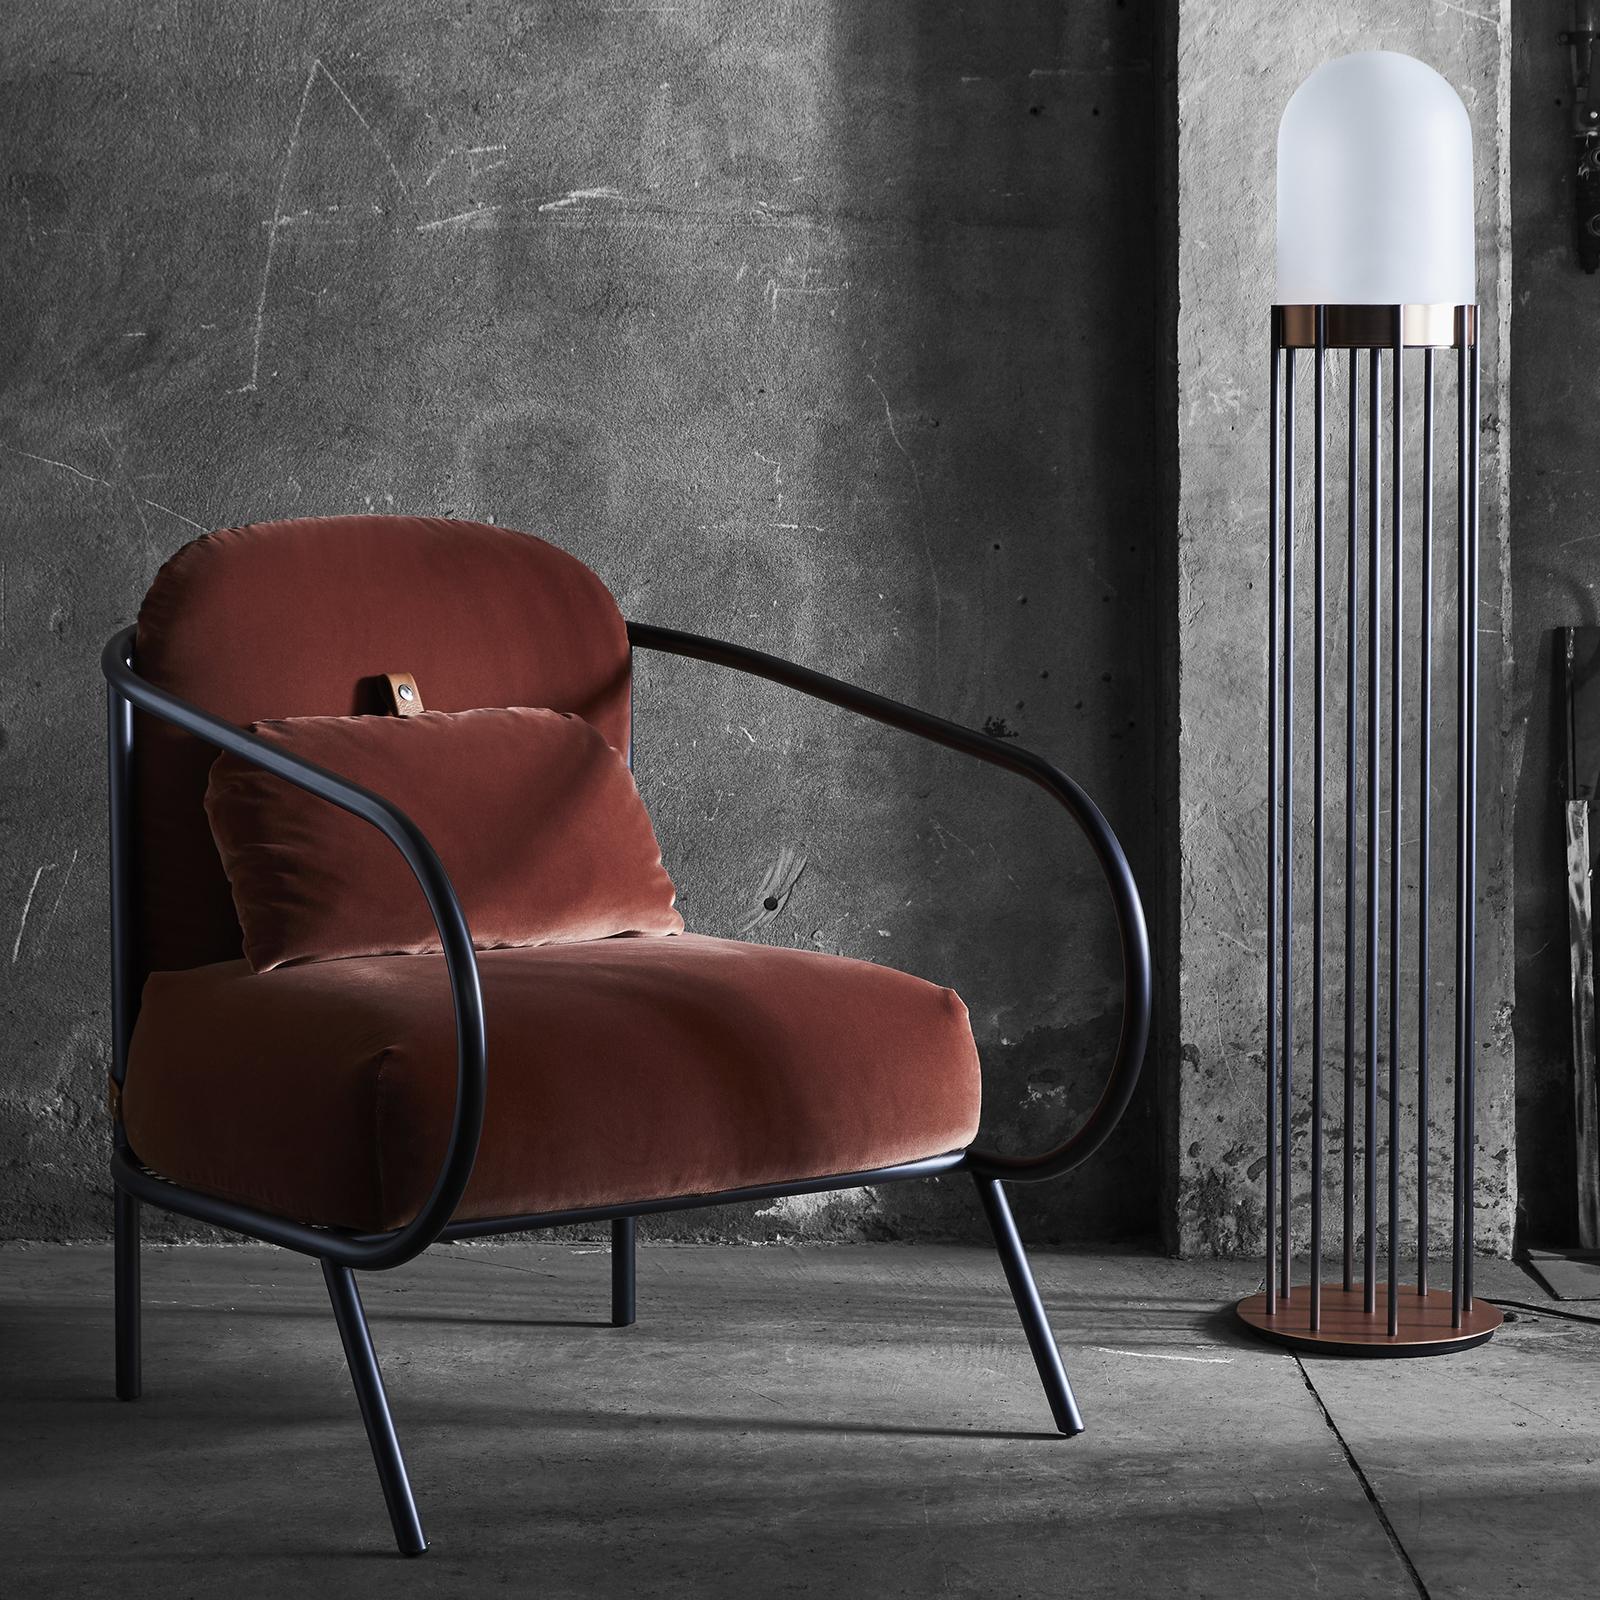 Presented for the first time at Fuorisalone during 2018 Milan Design Week, Minima is the first upholstered armchair in Mingardo's collections. Two soft cushions are hinges to the open, voluptuous frame handcrafted of black-finished iron tubes by